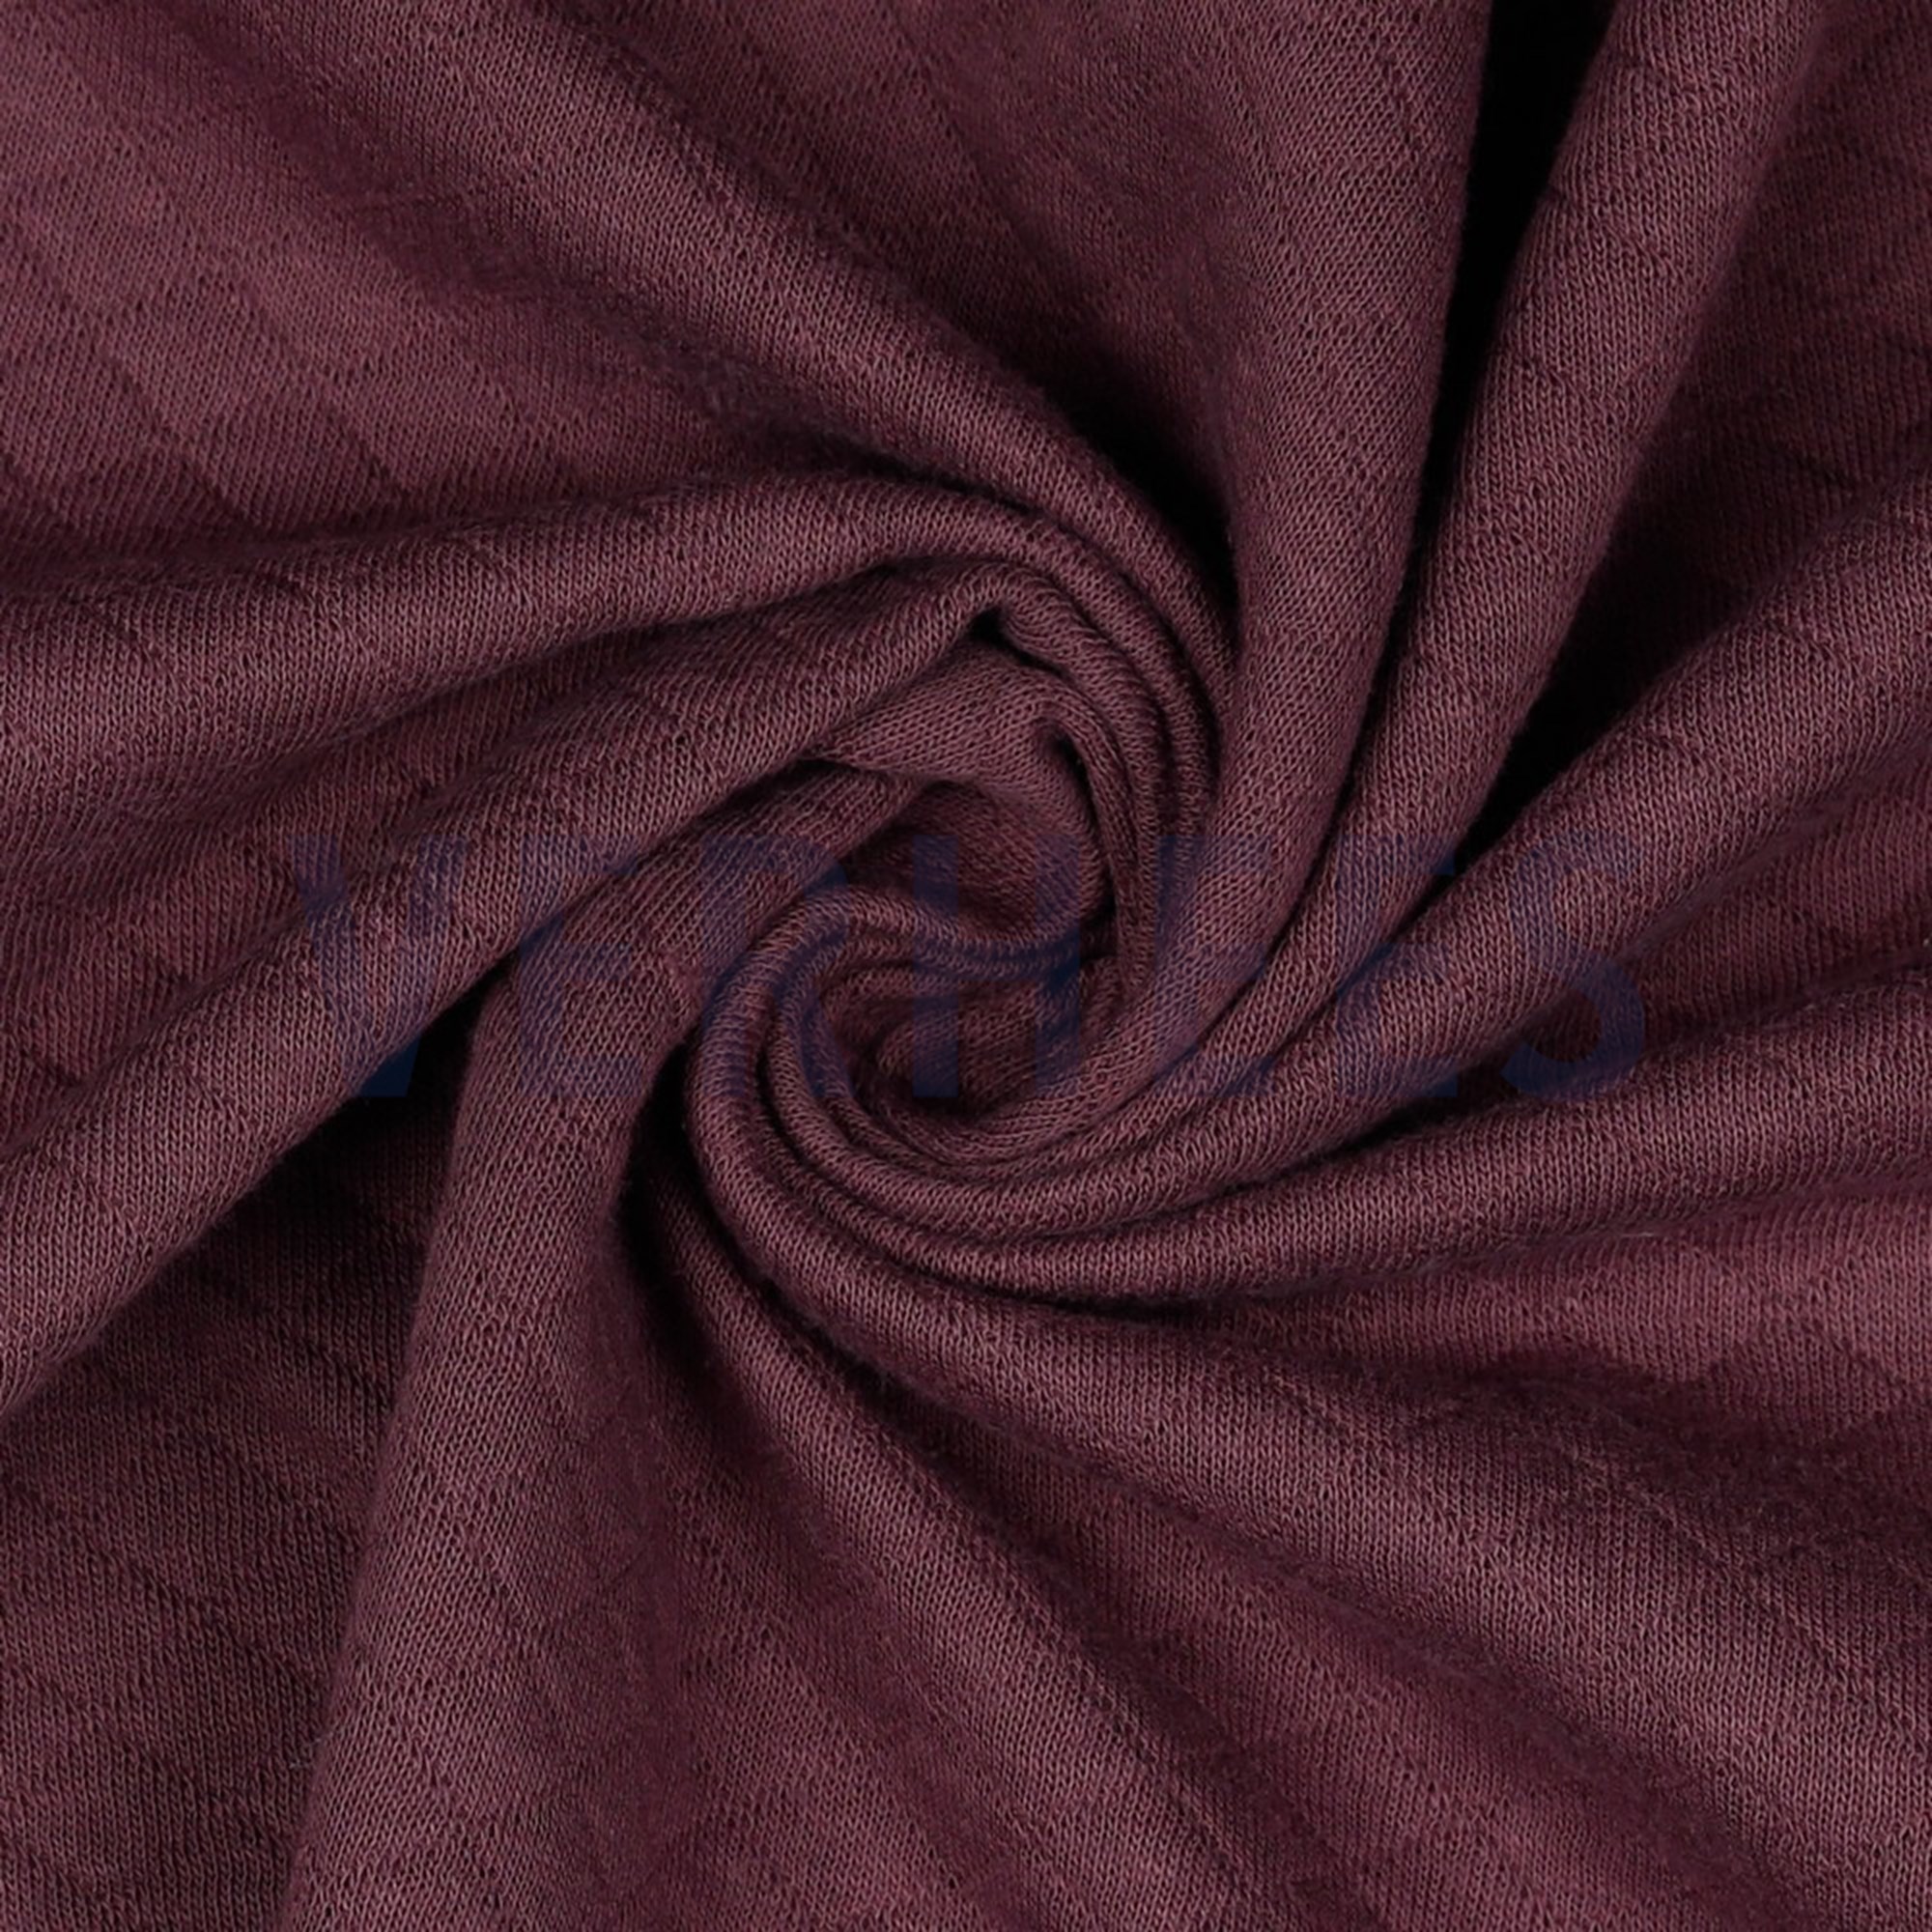 QUILT OLD PURPLE (high resolution) #3